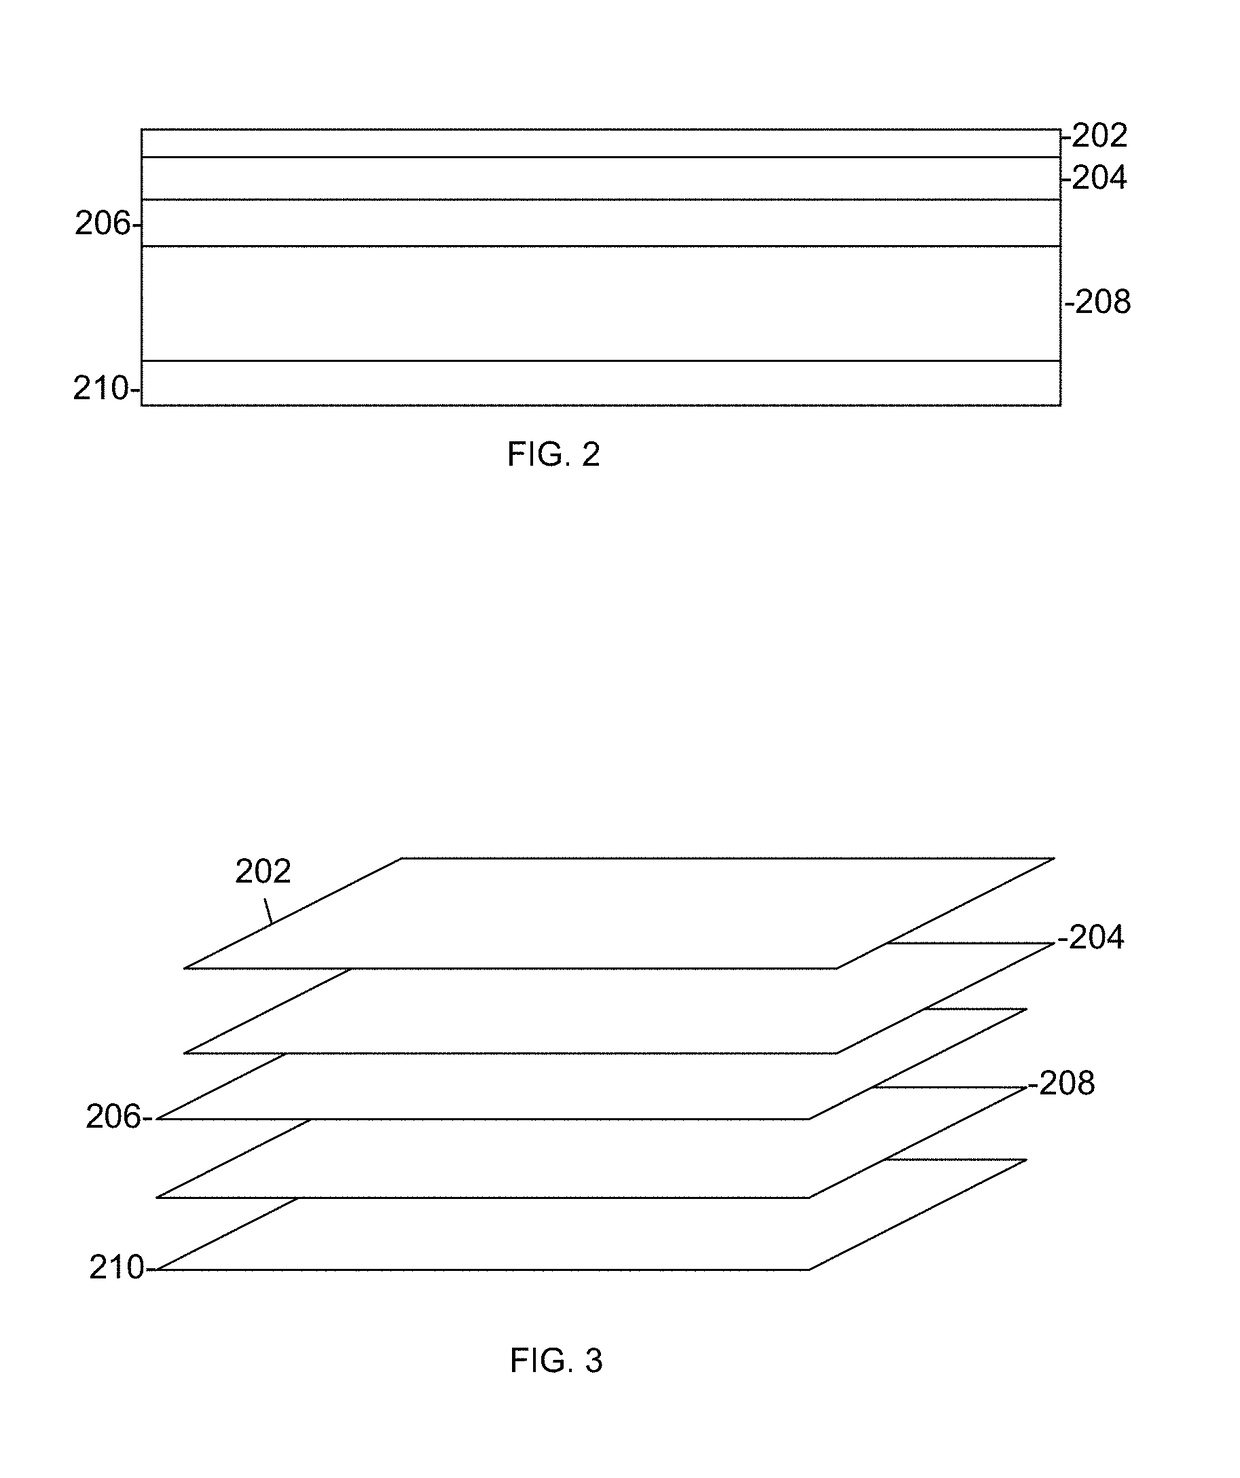 Method of passive reduction of radar cross-section using radar absorbing materials on composite structures